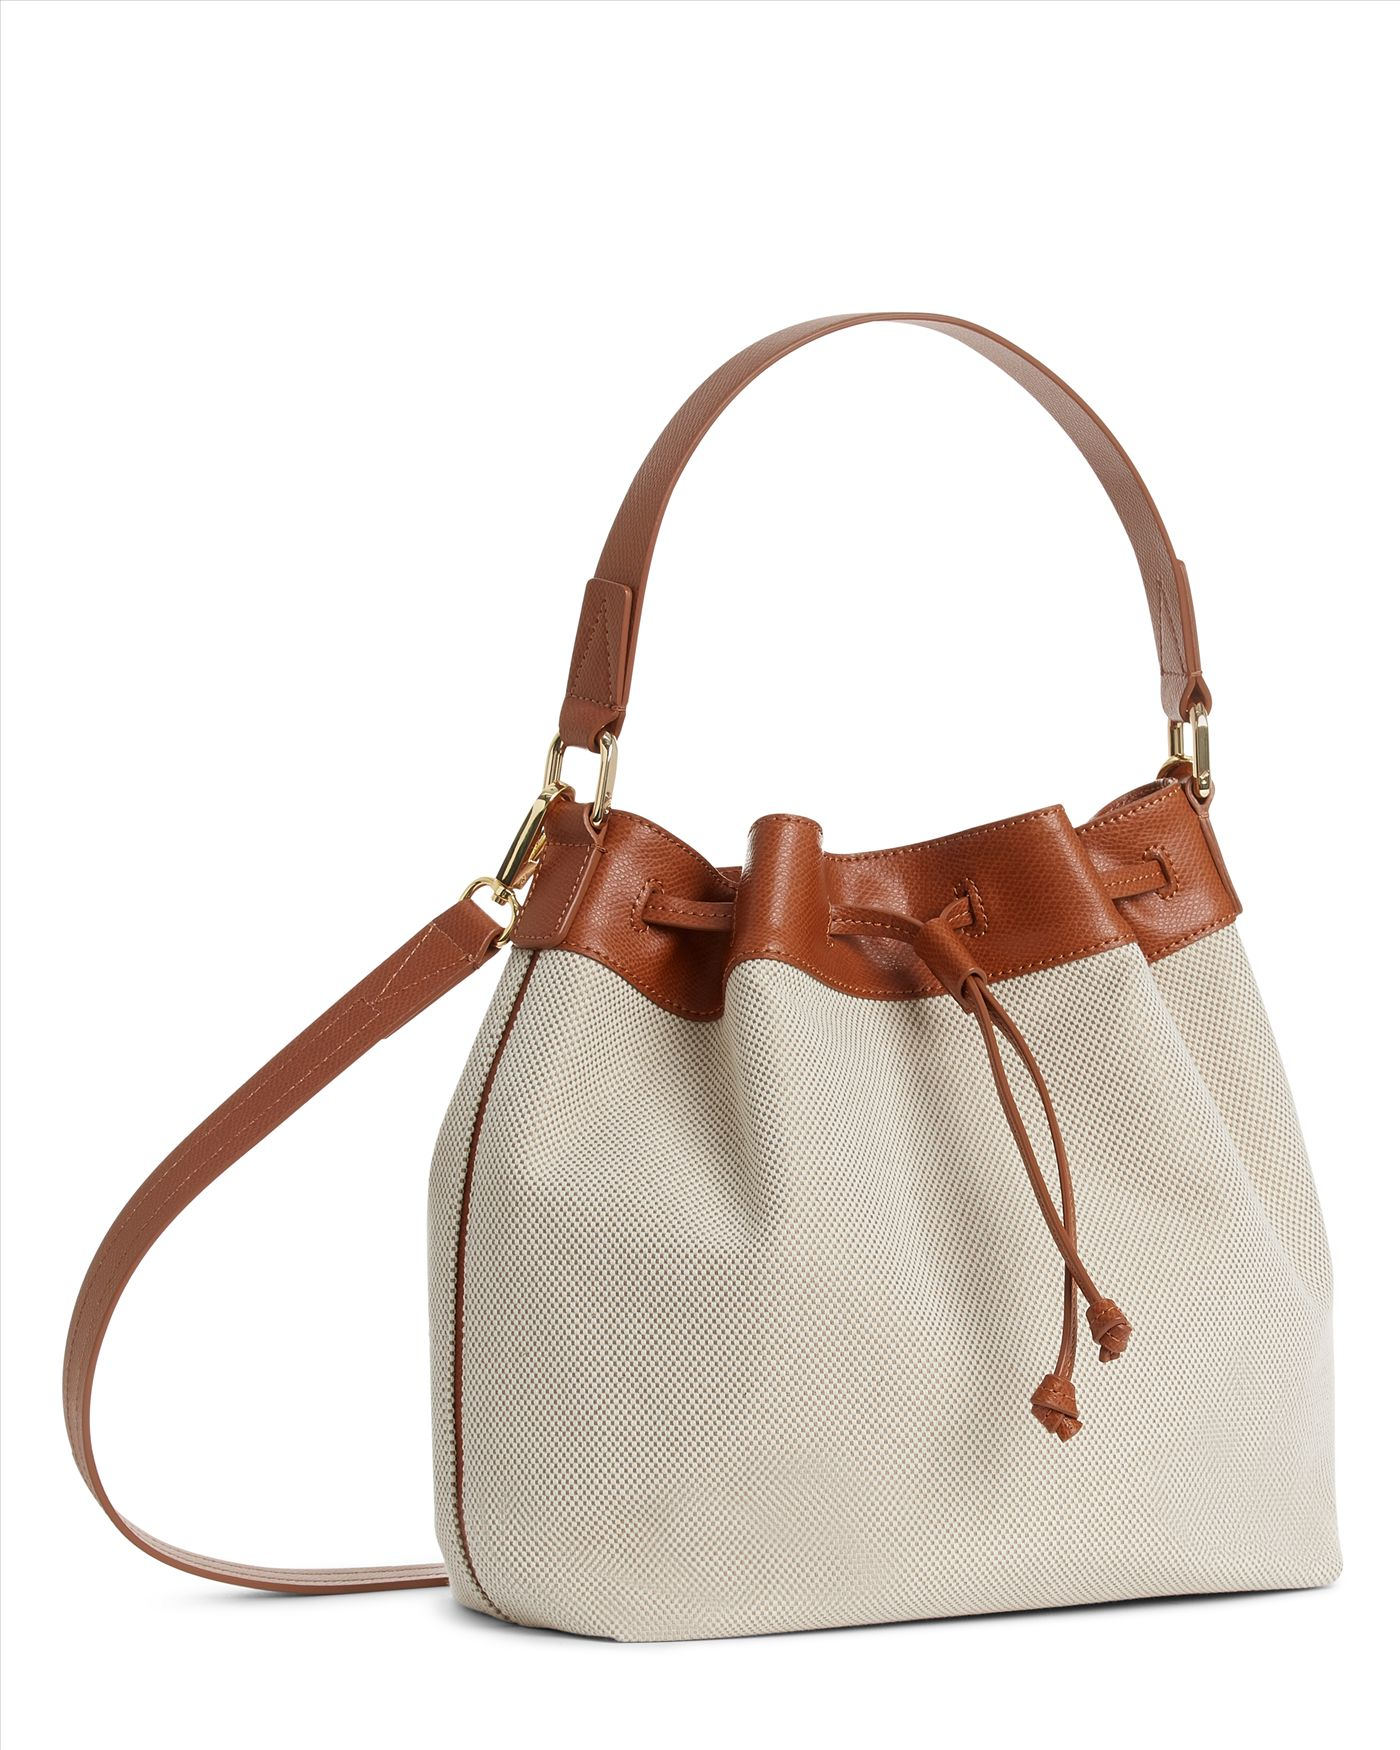 Lyst - Jaeger Canvas And Leather Duffle Bag in Natural